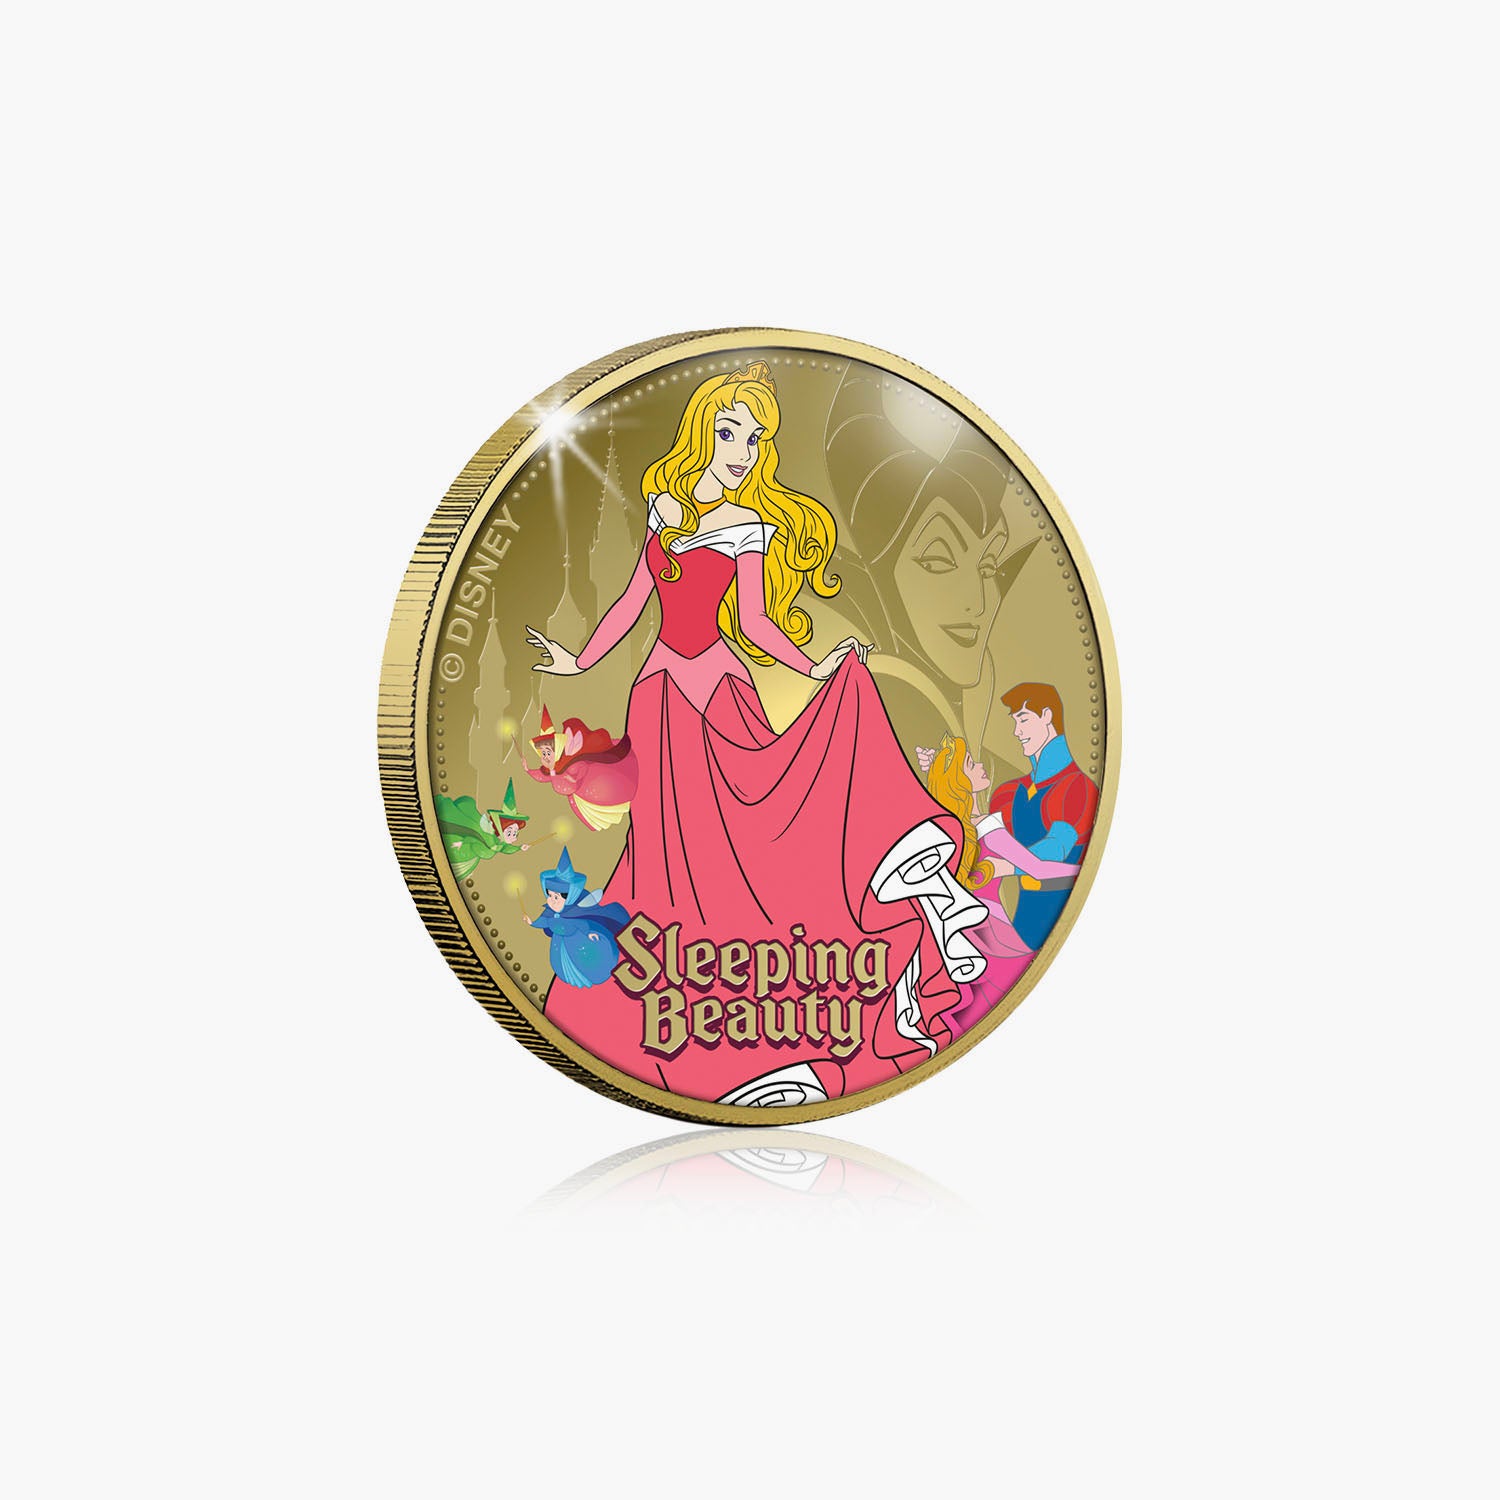 Sleeping Beauty Gold-Plated Commemorative